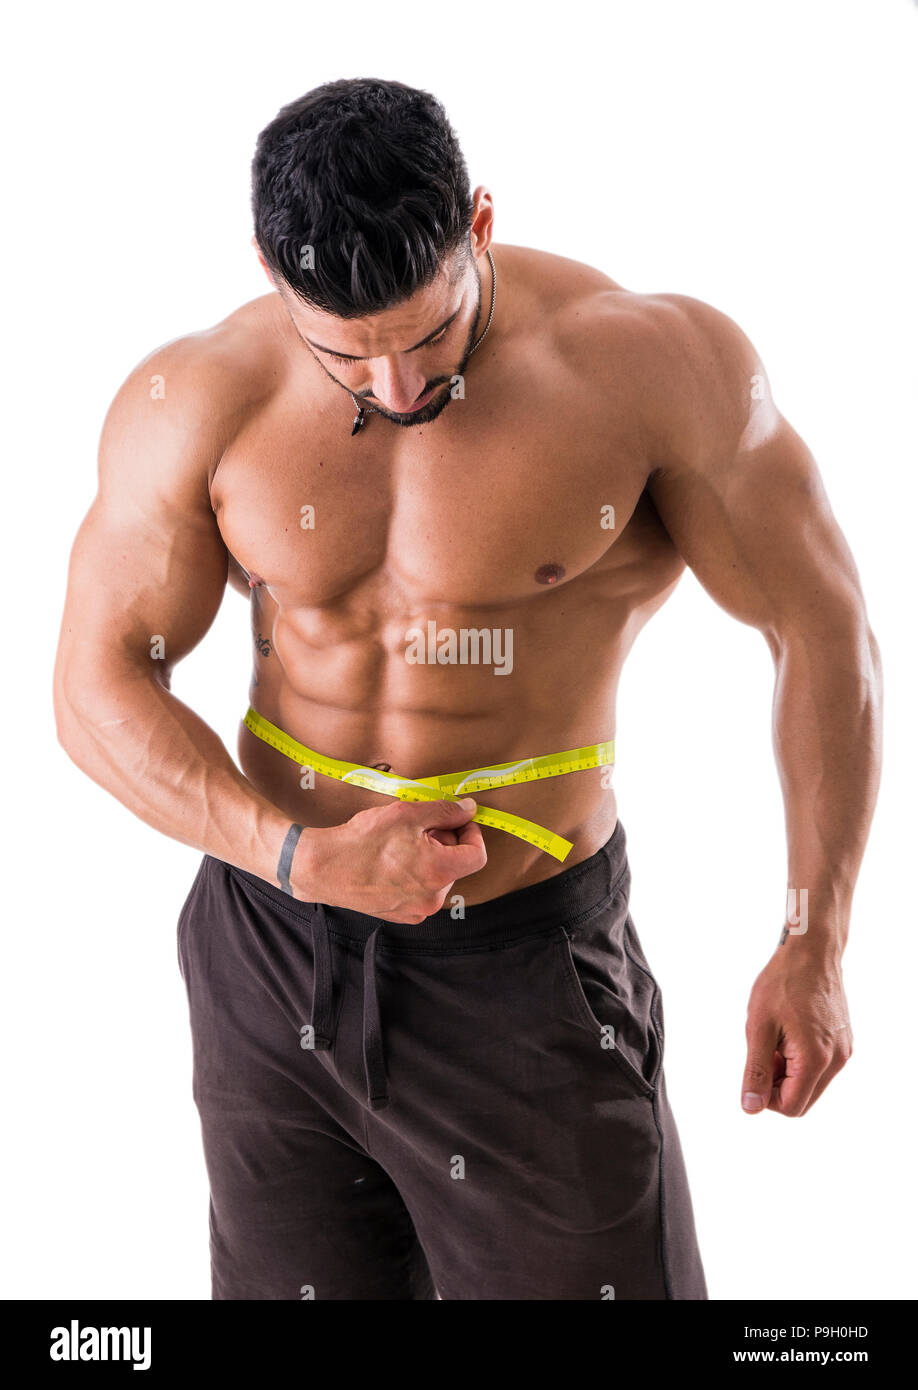 Muscles Measuring Tape, Body Measuring Tape, Muscle Measurement